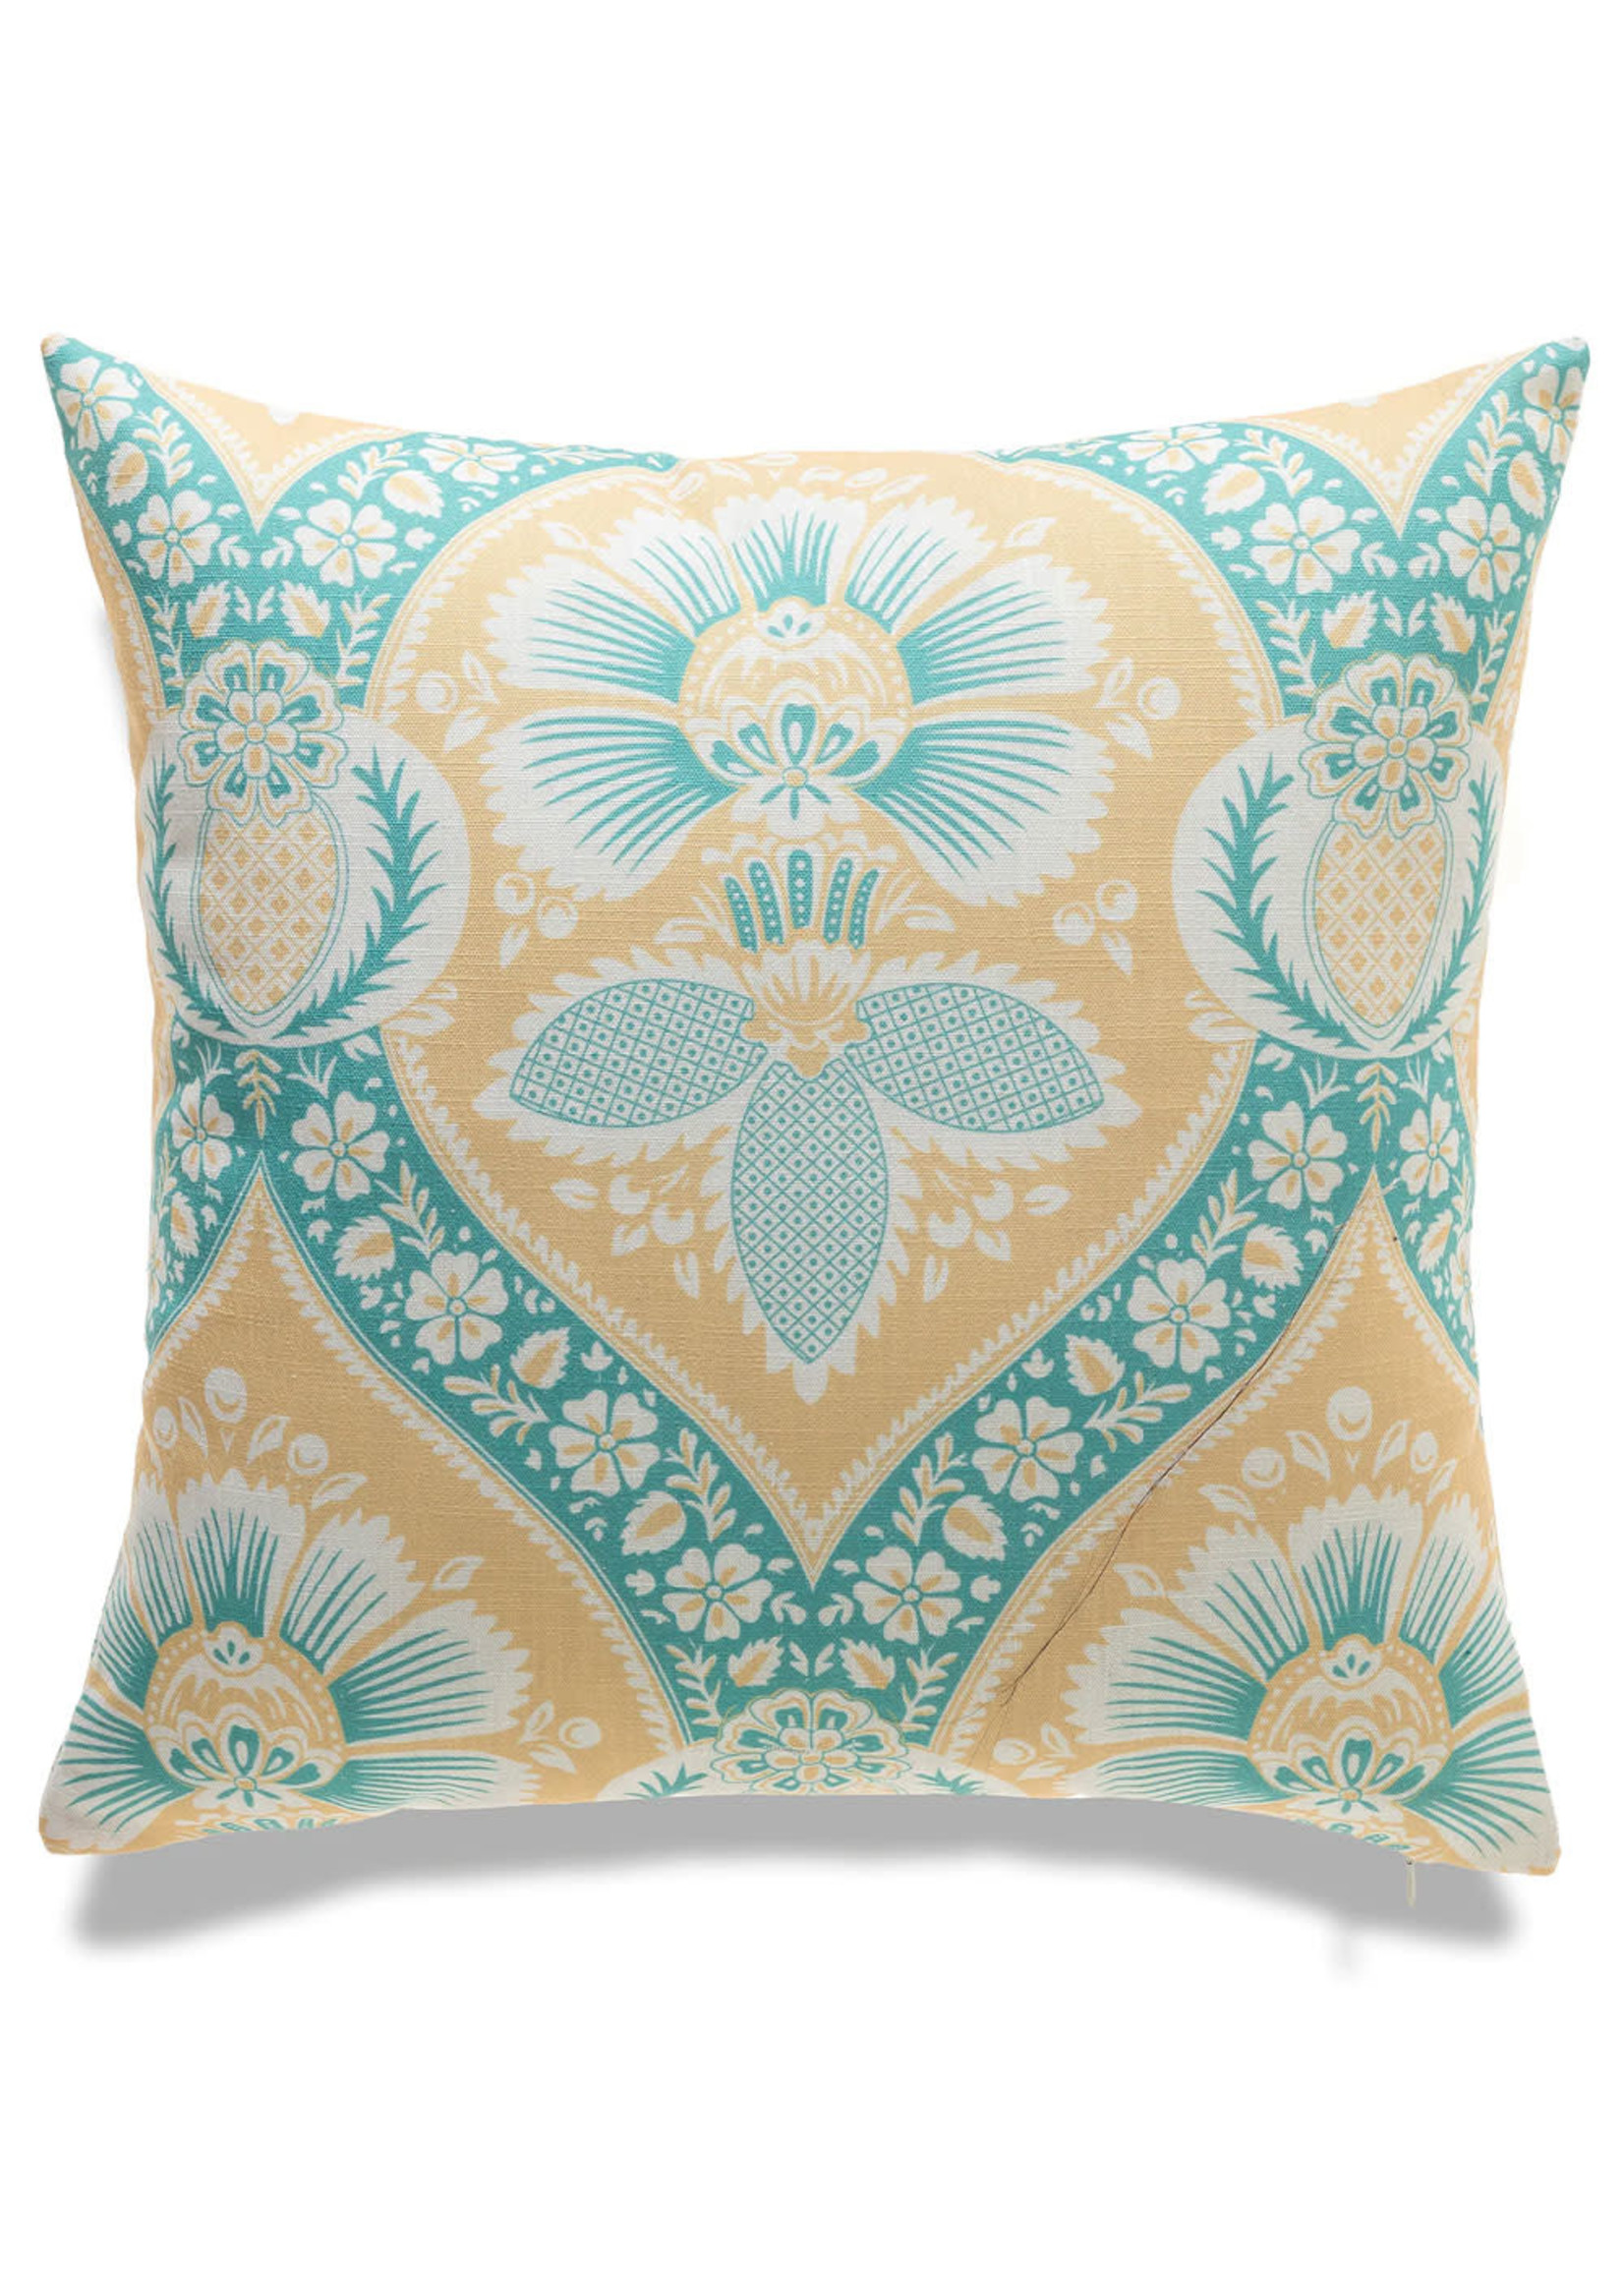 Floral Prints - Florence Throw Pillow 20x20 Yellow/Blue